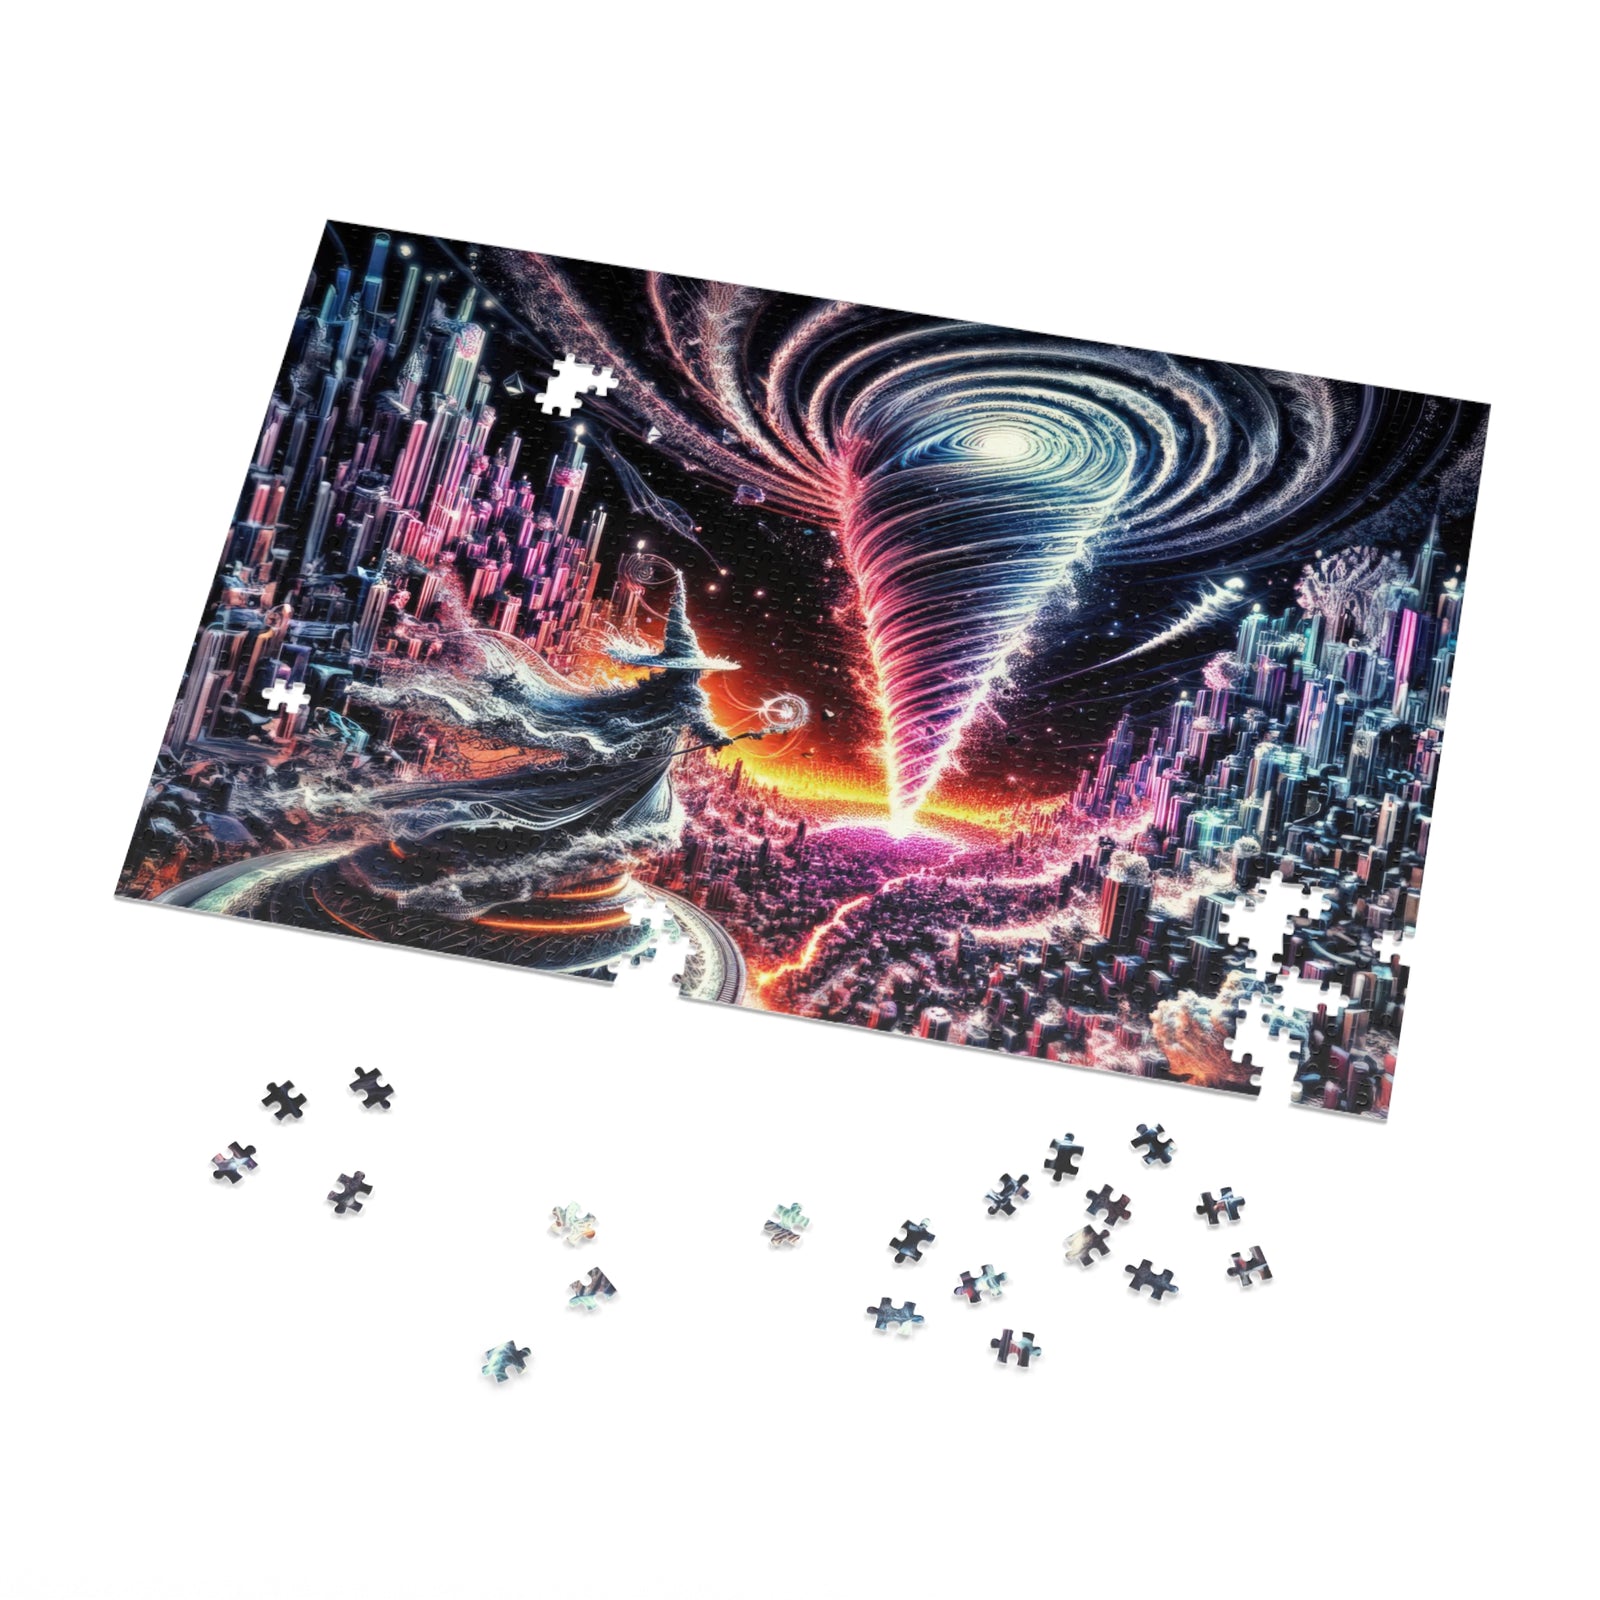 Convergence of Cosmic Symphonies Jigsaw Puzzle